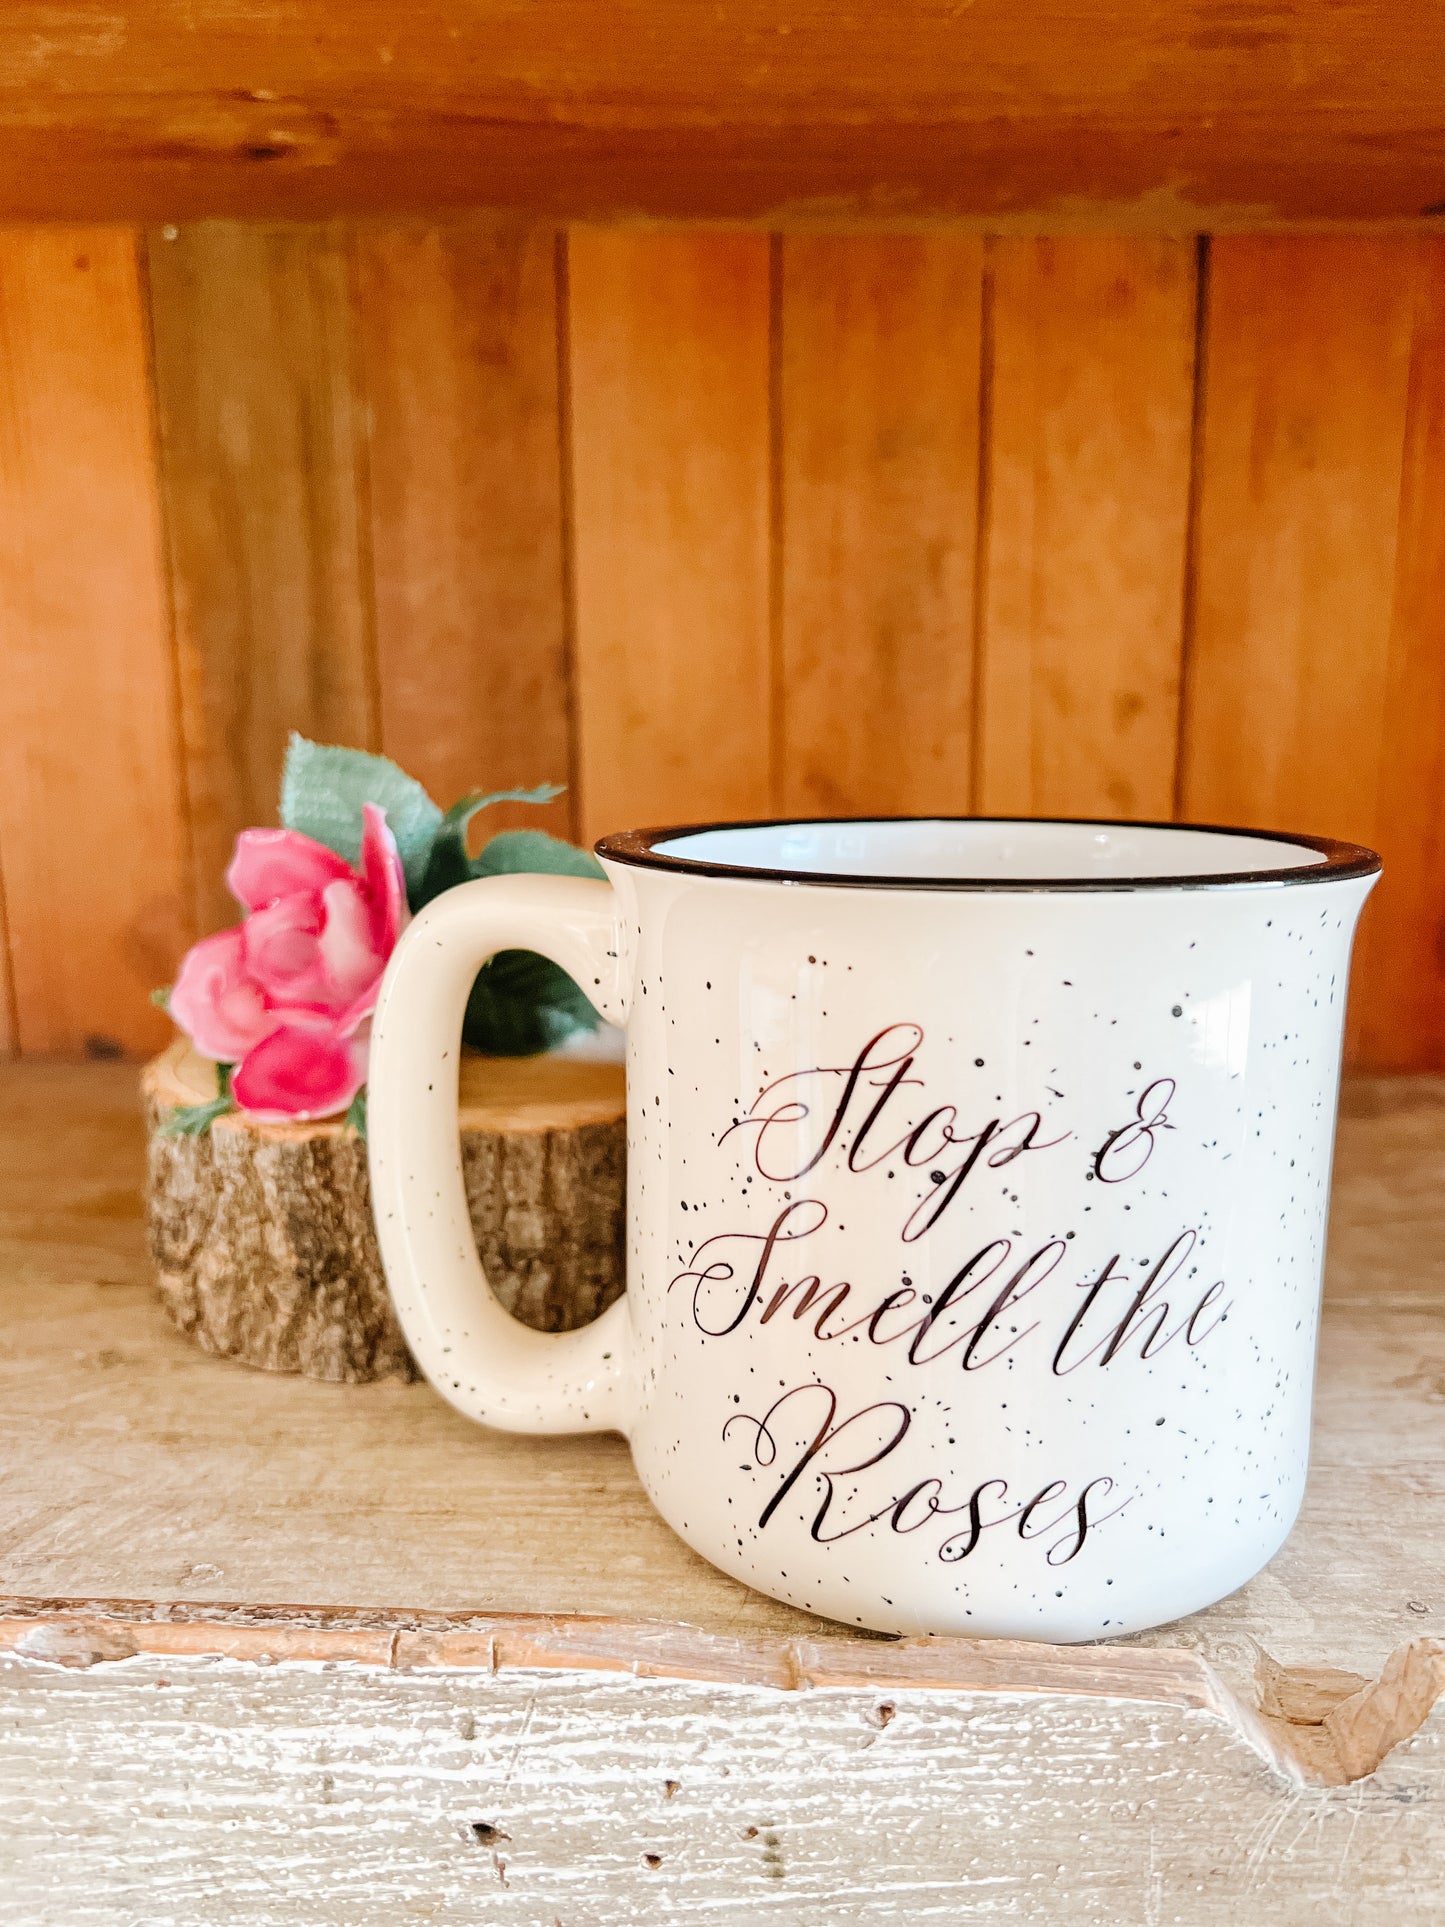 Stop & Smell the Roses mug